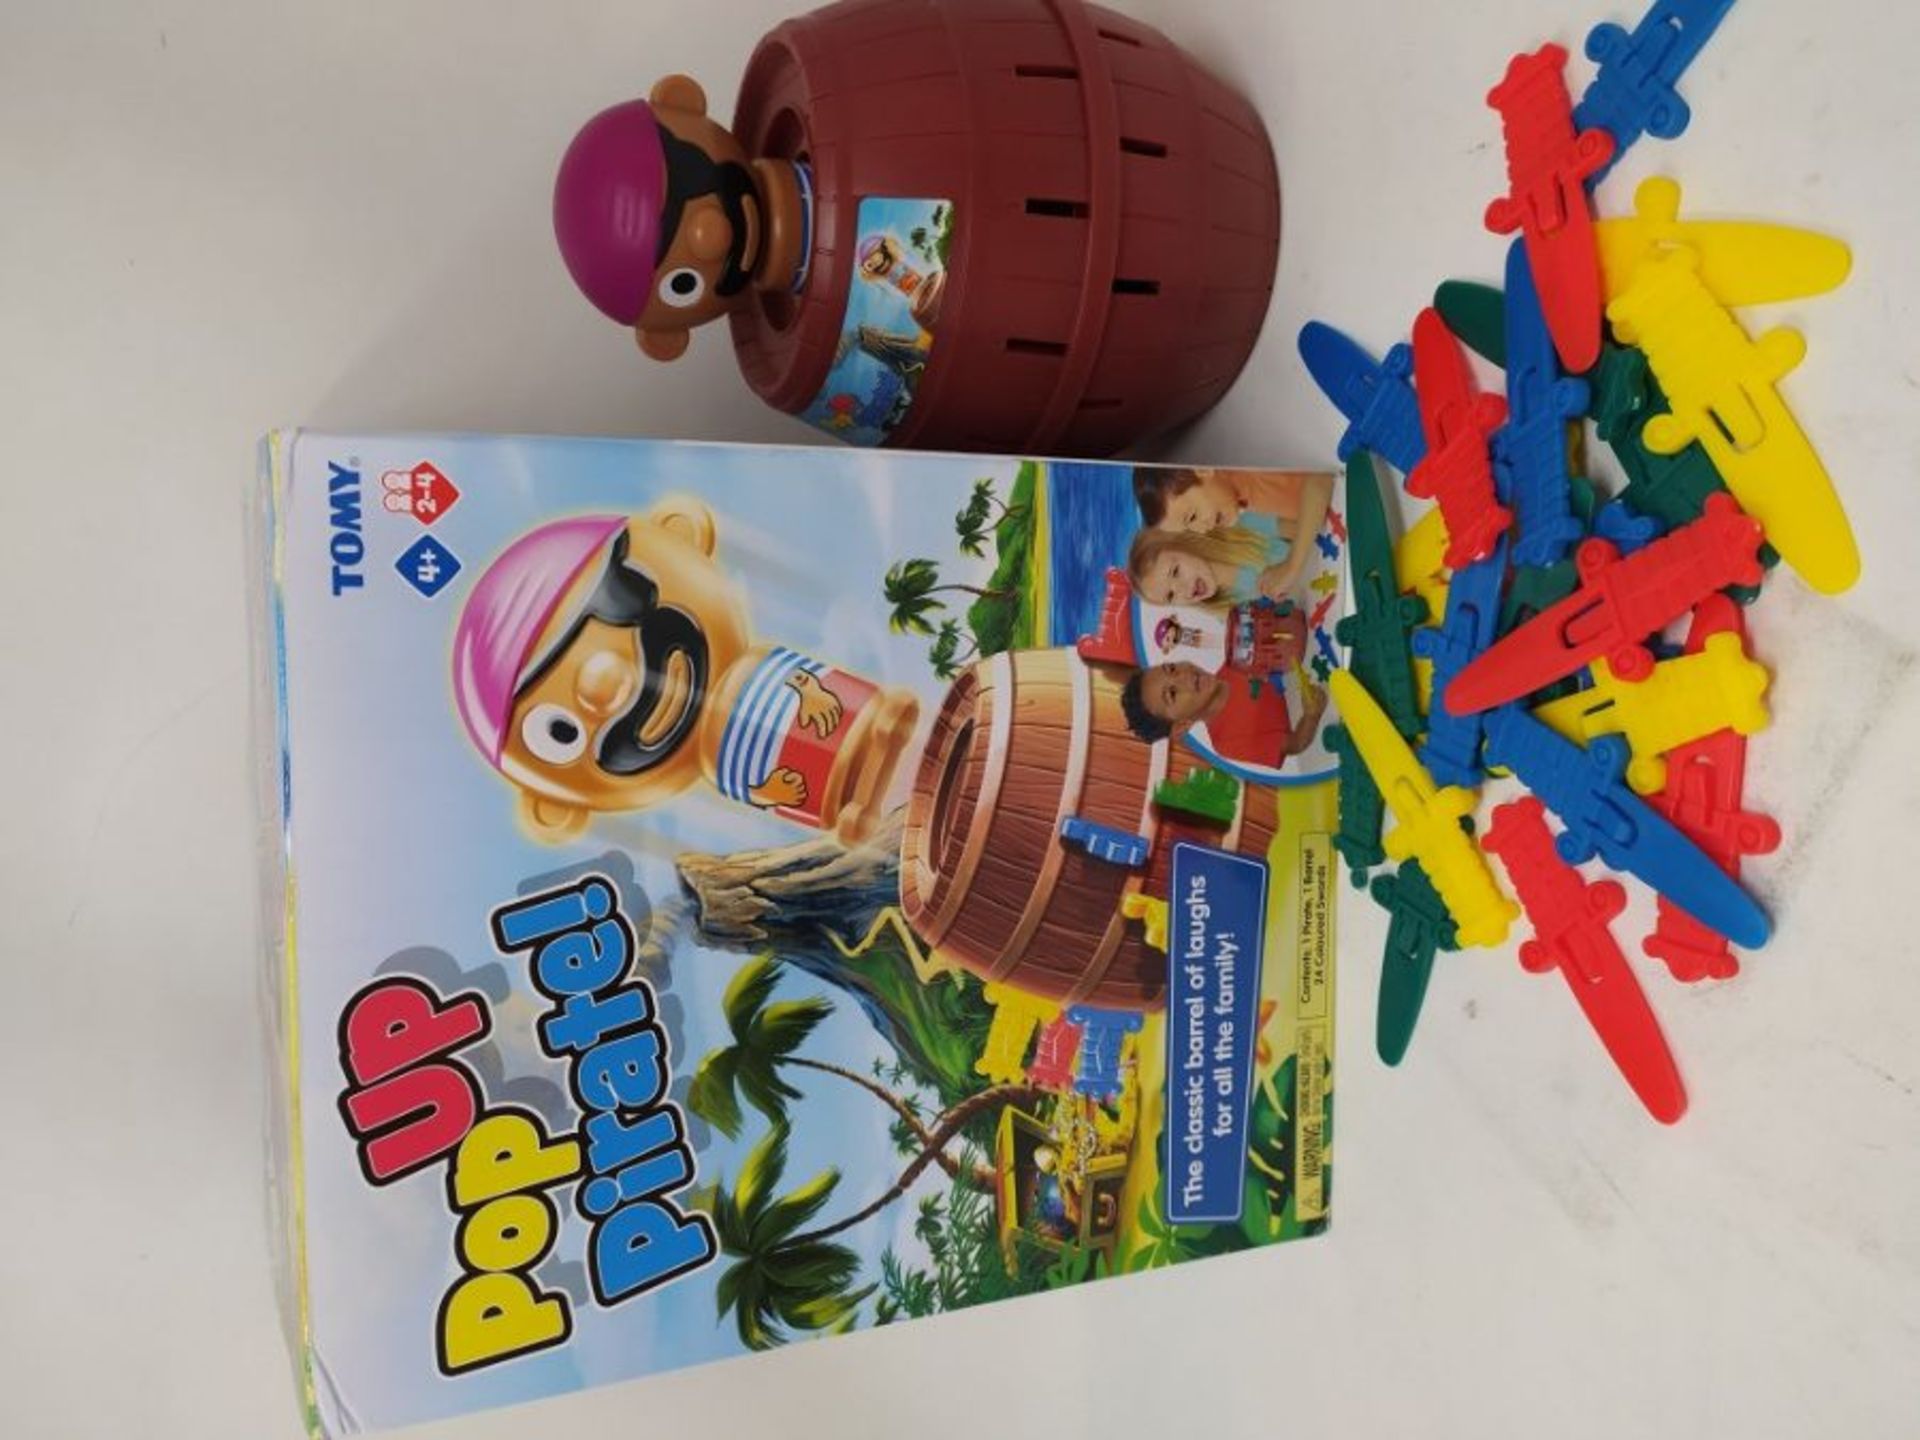 TOMY Games T7028 TOMY Pop Up Pirate Classic Children's Action Board Game Toy, Wood-Cho - Image 3 of 3